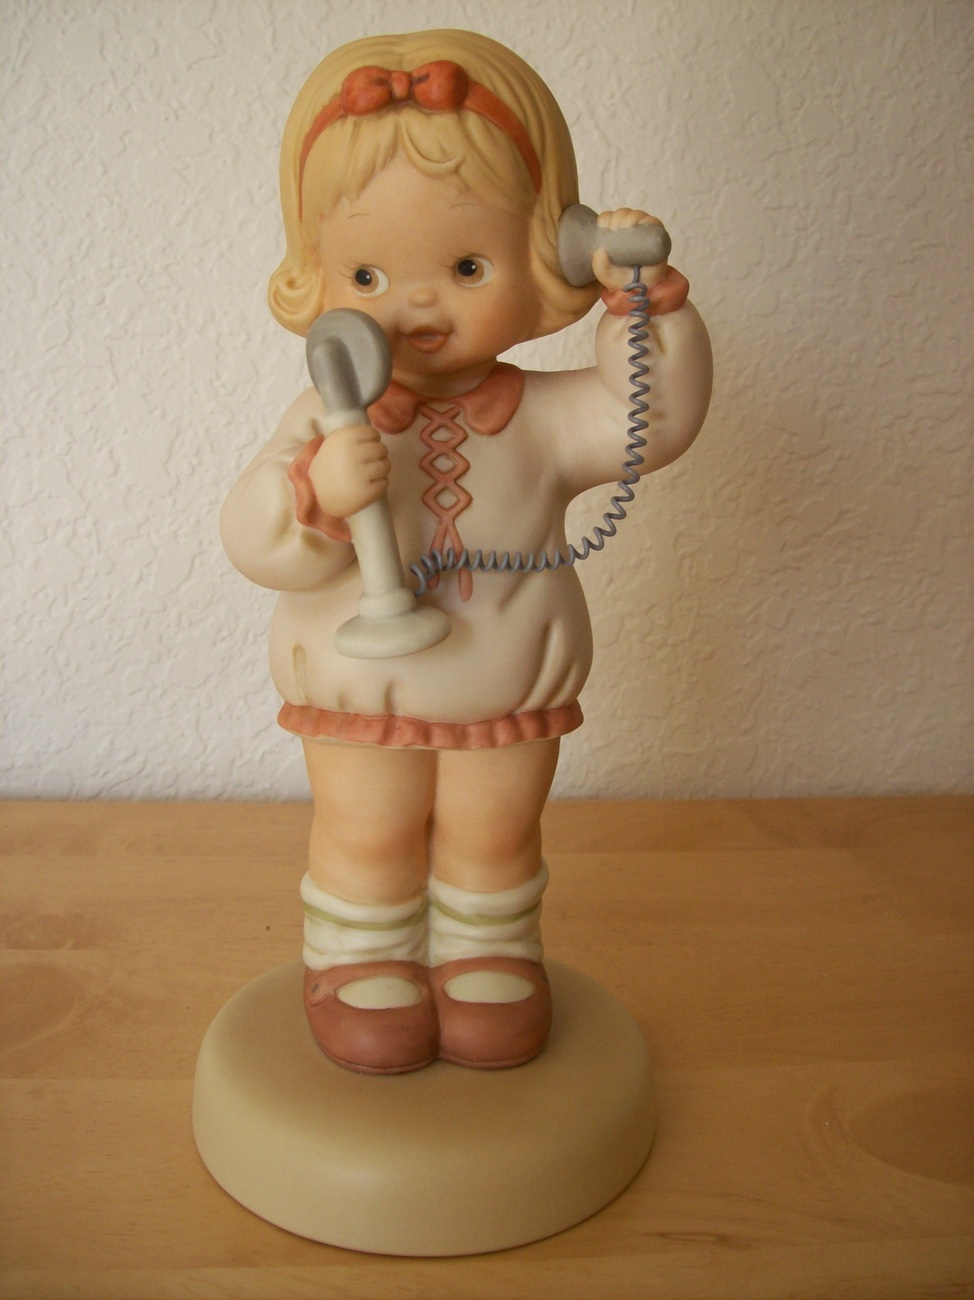 Primary image for 1991 Memories of Yesterday Enesco “I’m So Happy You Called” Tall Figurine.